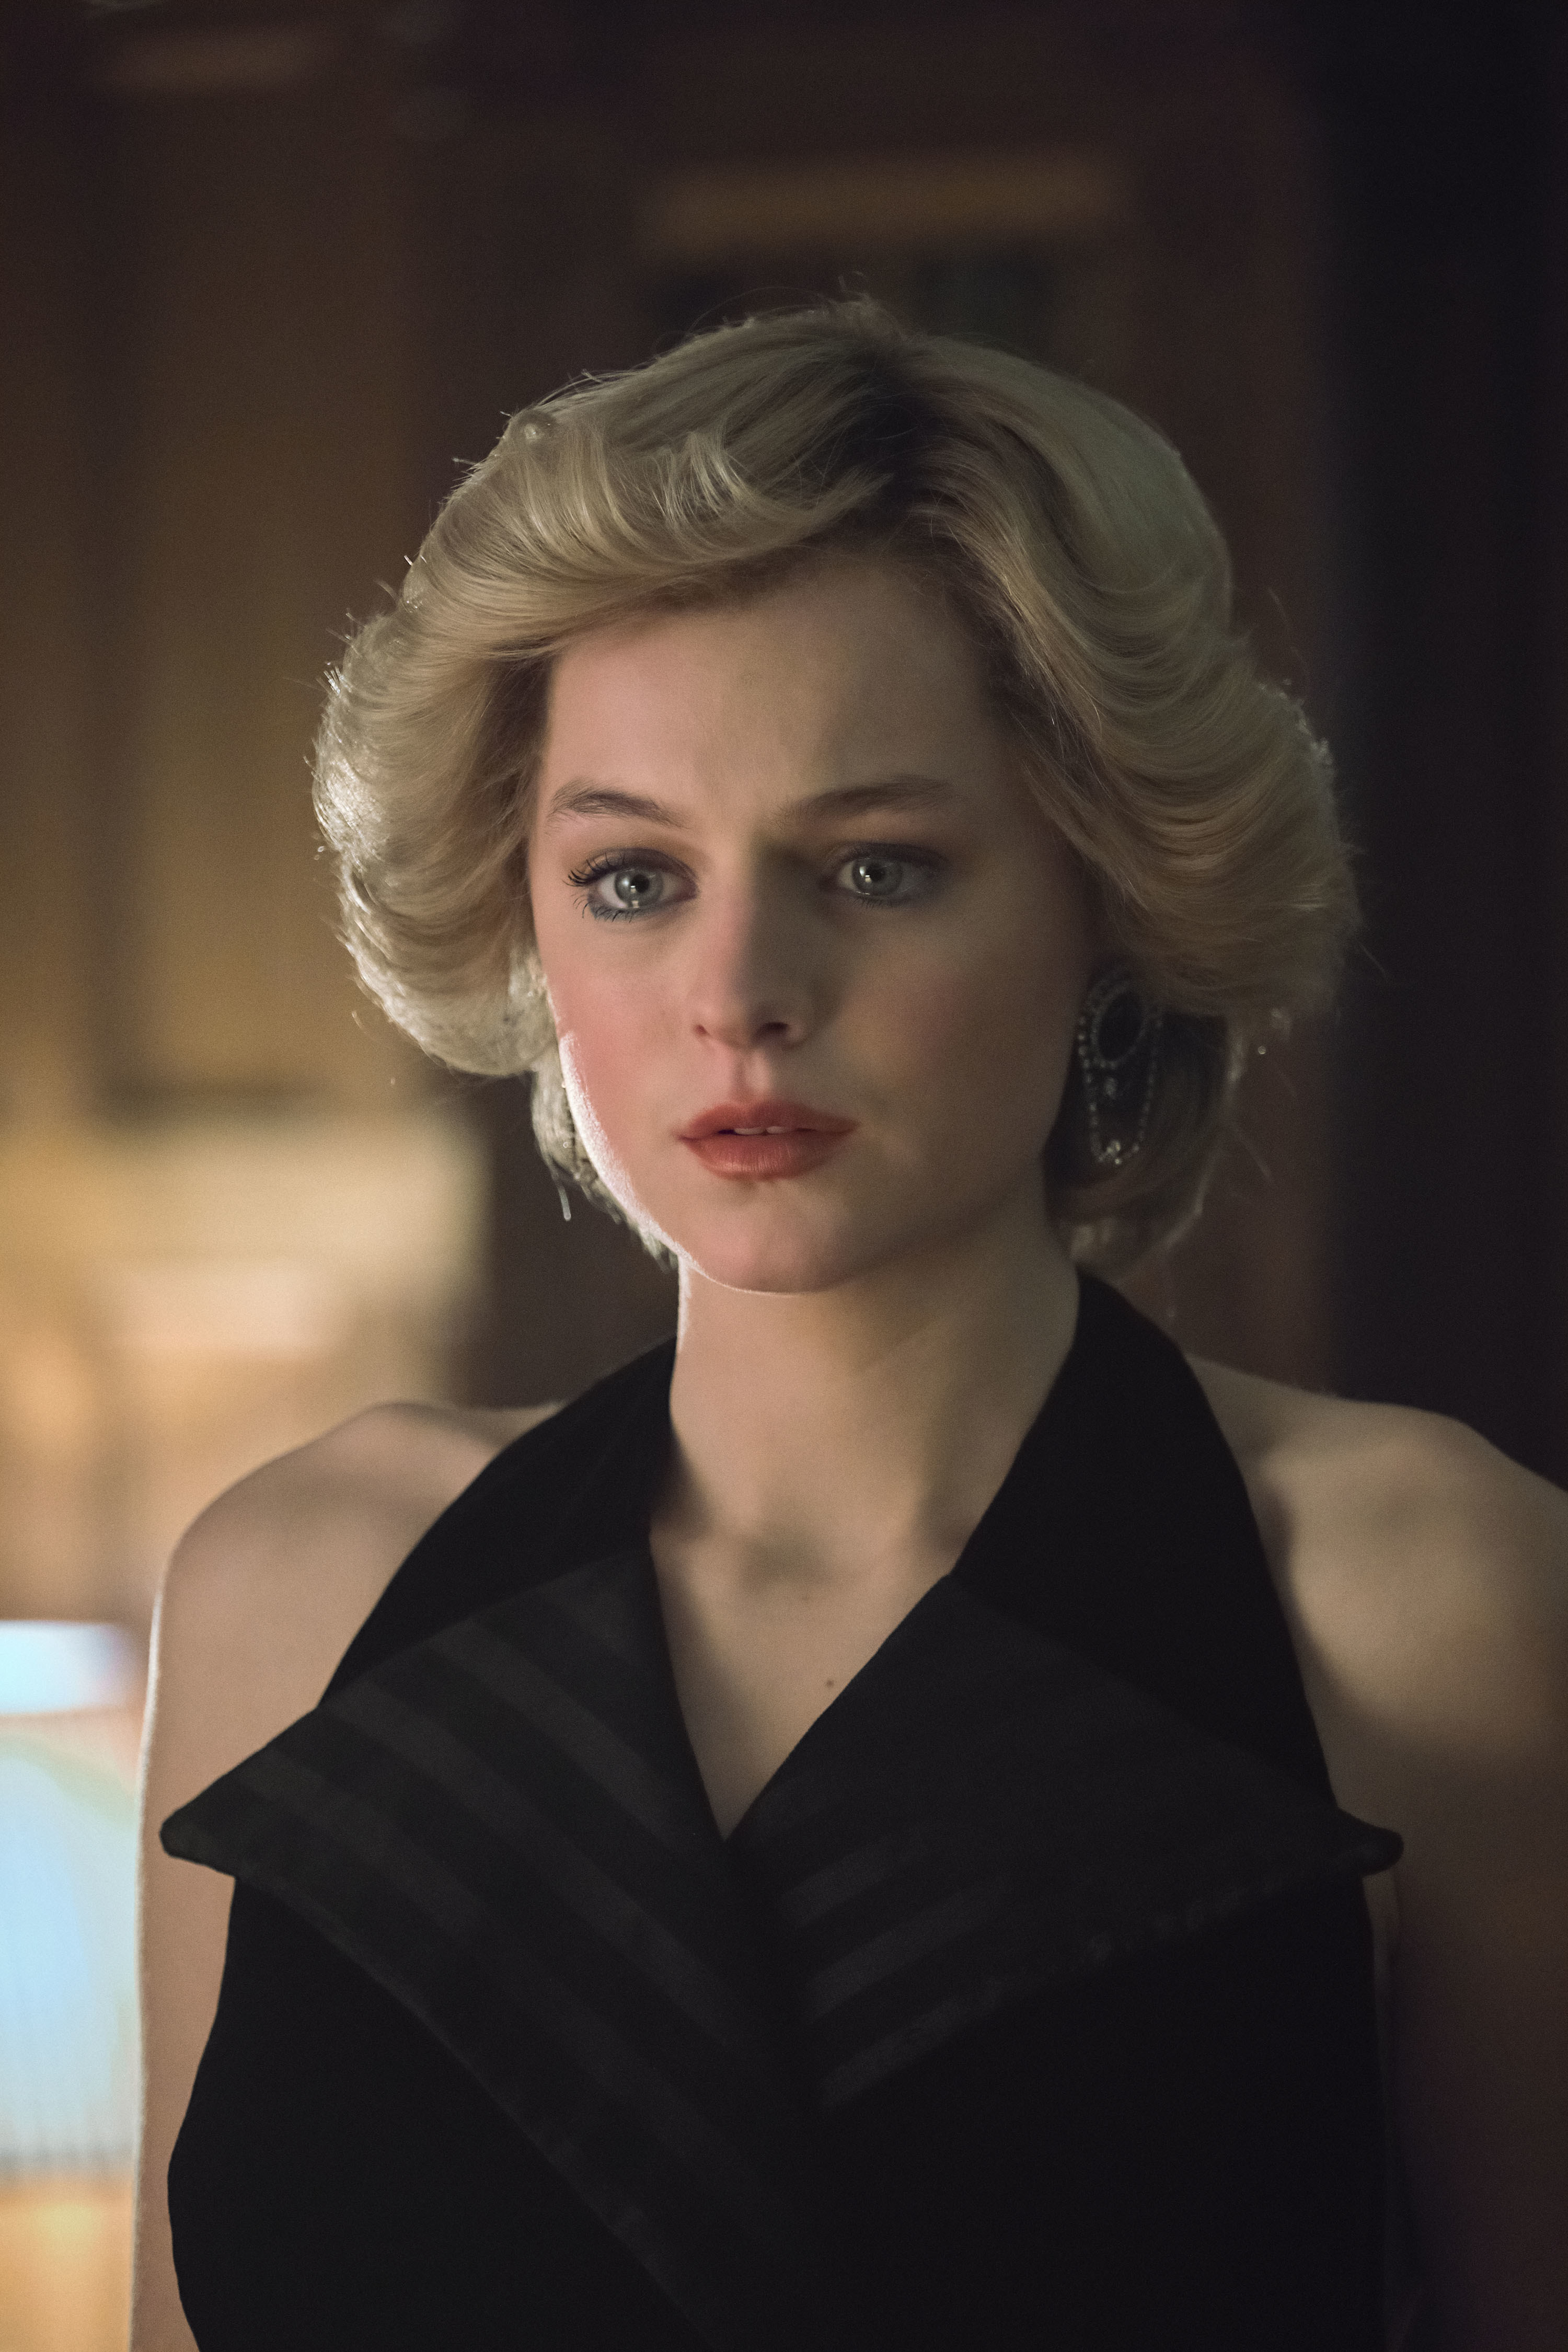 An image of Emma Corrin (who portrays Princess Diana) with a tear in her eye in season 4 of &quot;The Crown.&quot;